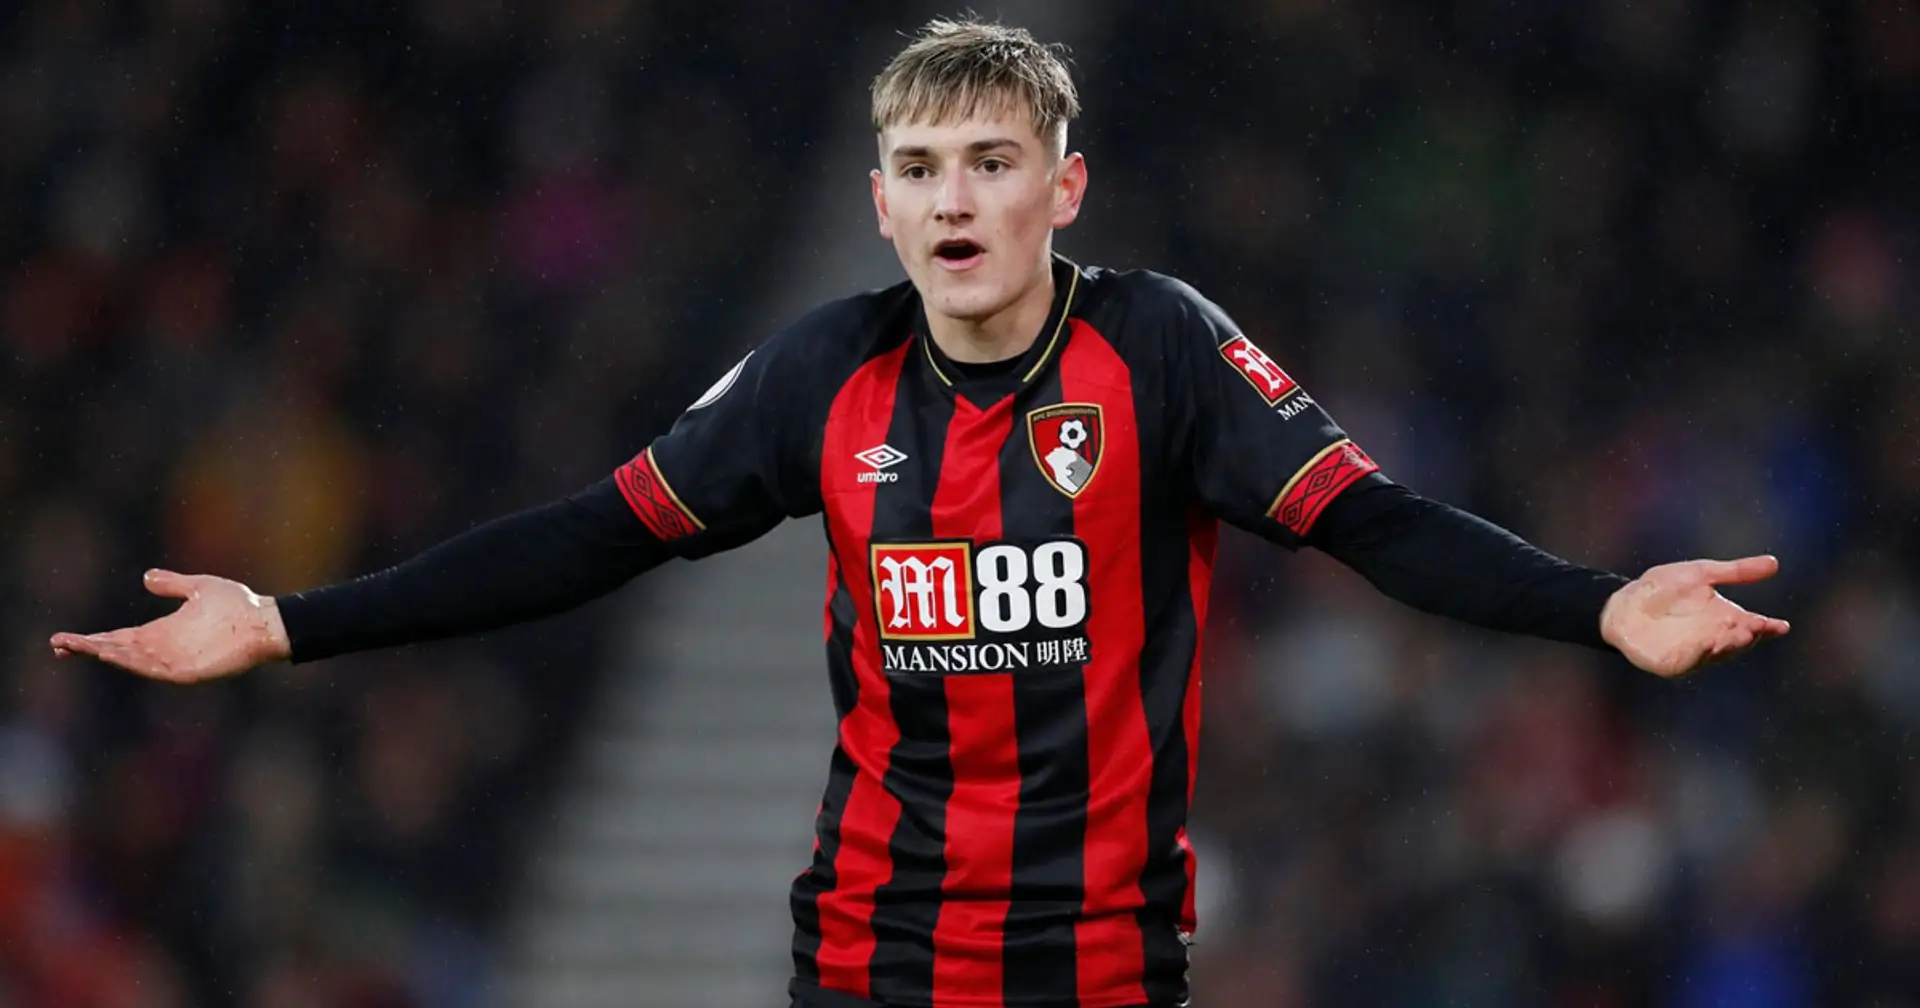 Bournemouth manager insists club ‘won’t stand in anybody’s way’ if they wish to leave amid United interest in Brooks